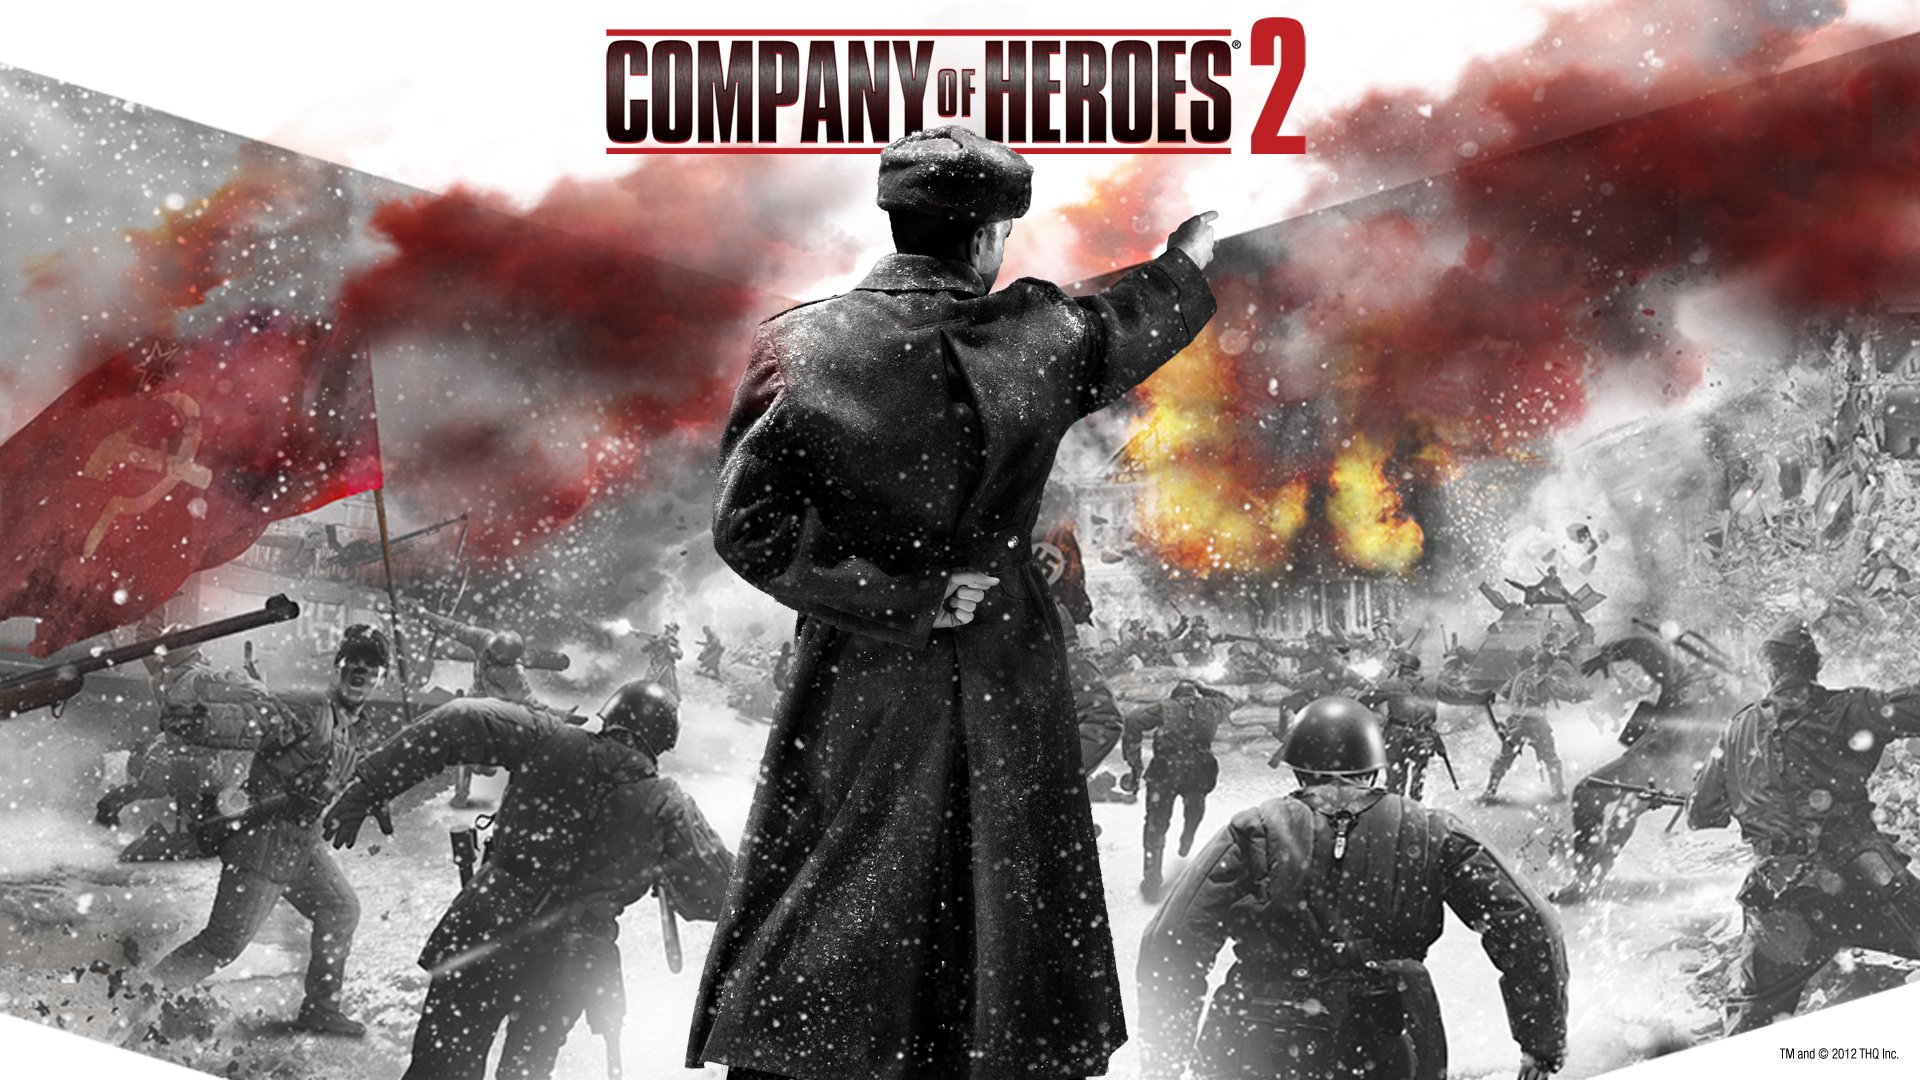 company of heroes 2 steam download free